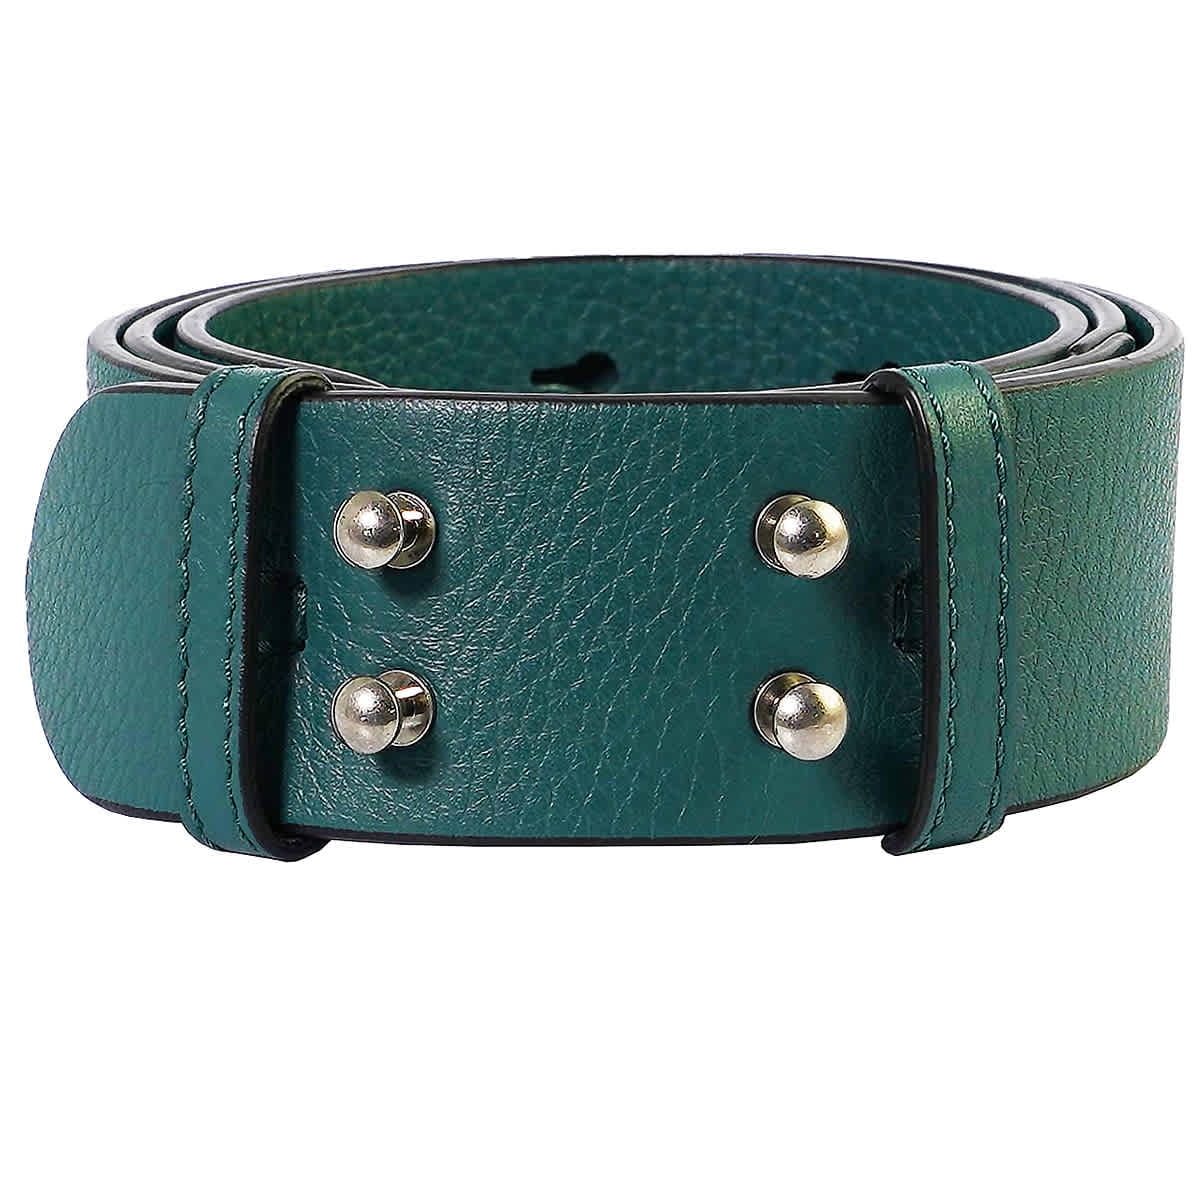 Burberry Ladies Small Belt Bag Grainy Leather Belt in Sea Green -  